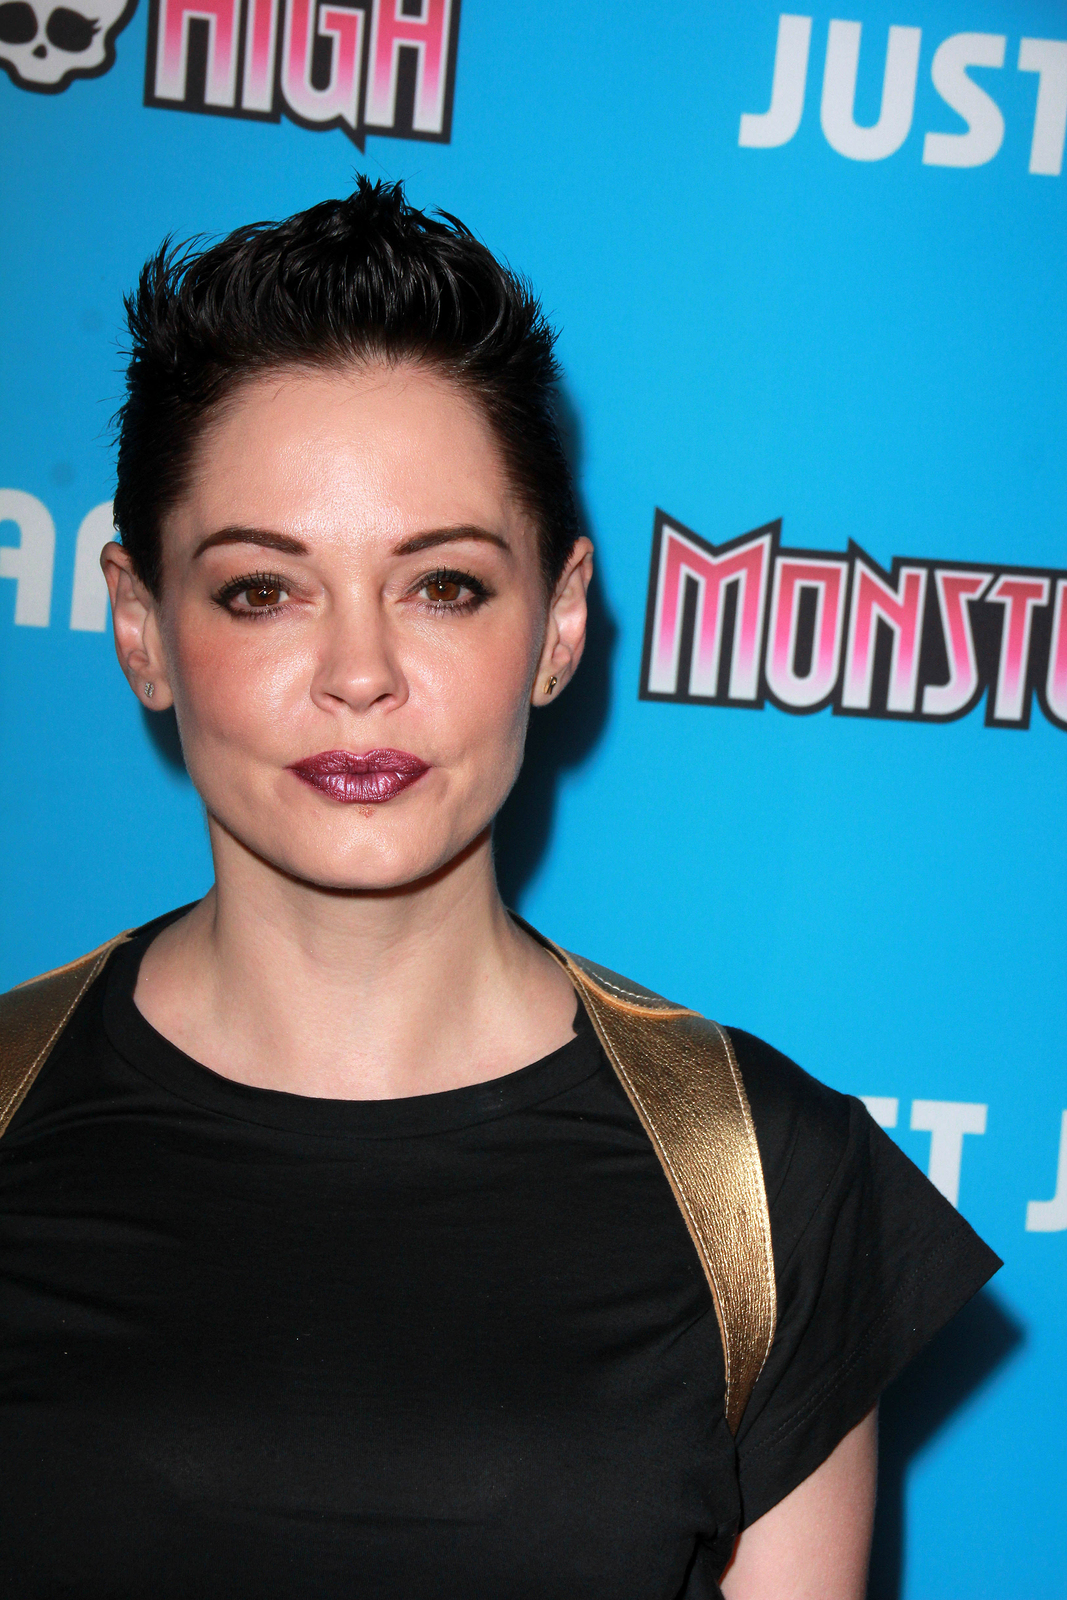 Weinstein accuser Rose McGowan faces arrest warrant for drugs: ‘Are they trying to silence me?’